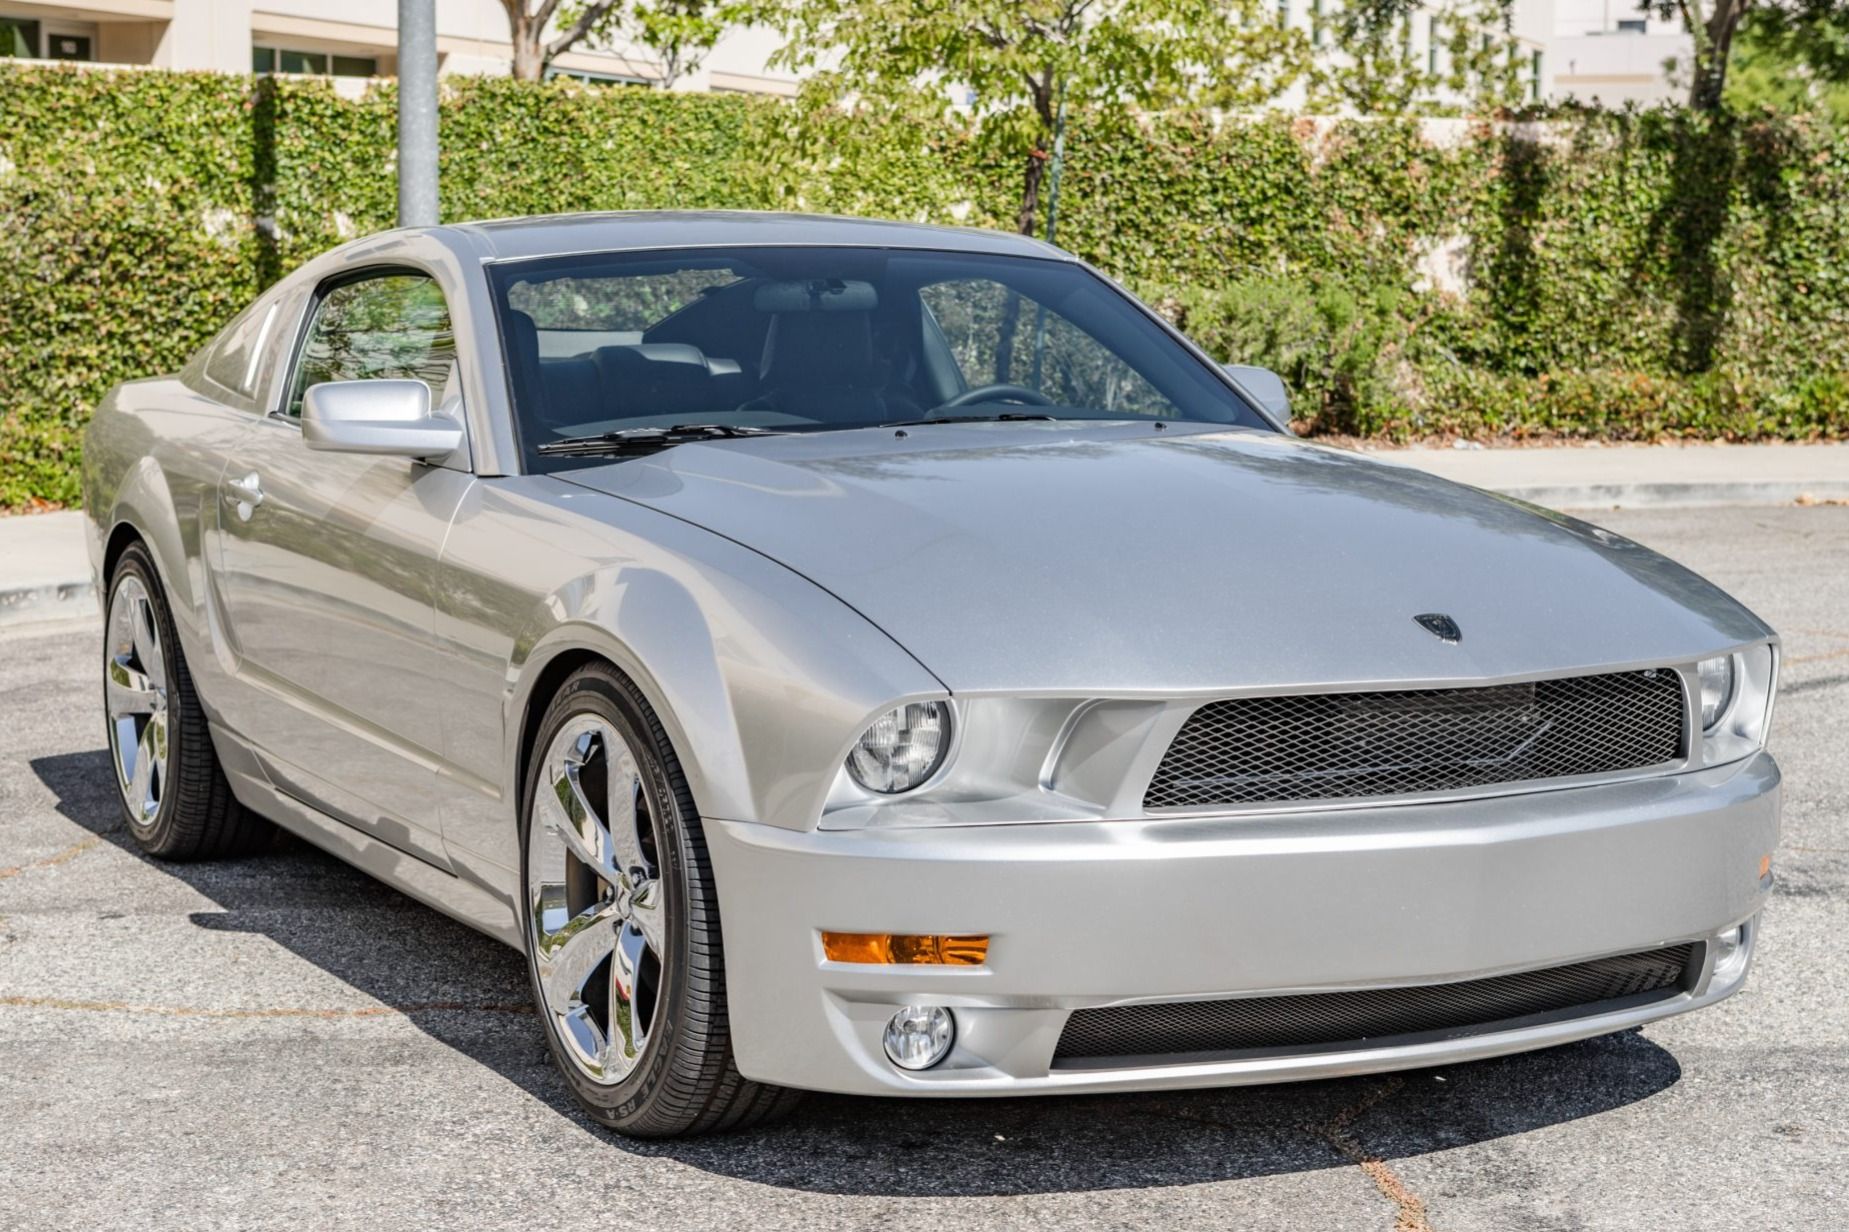 2009 Ford Mustang, Silver